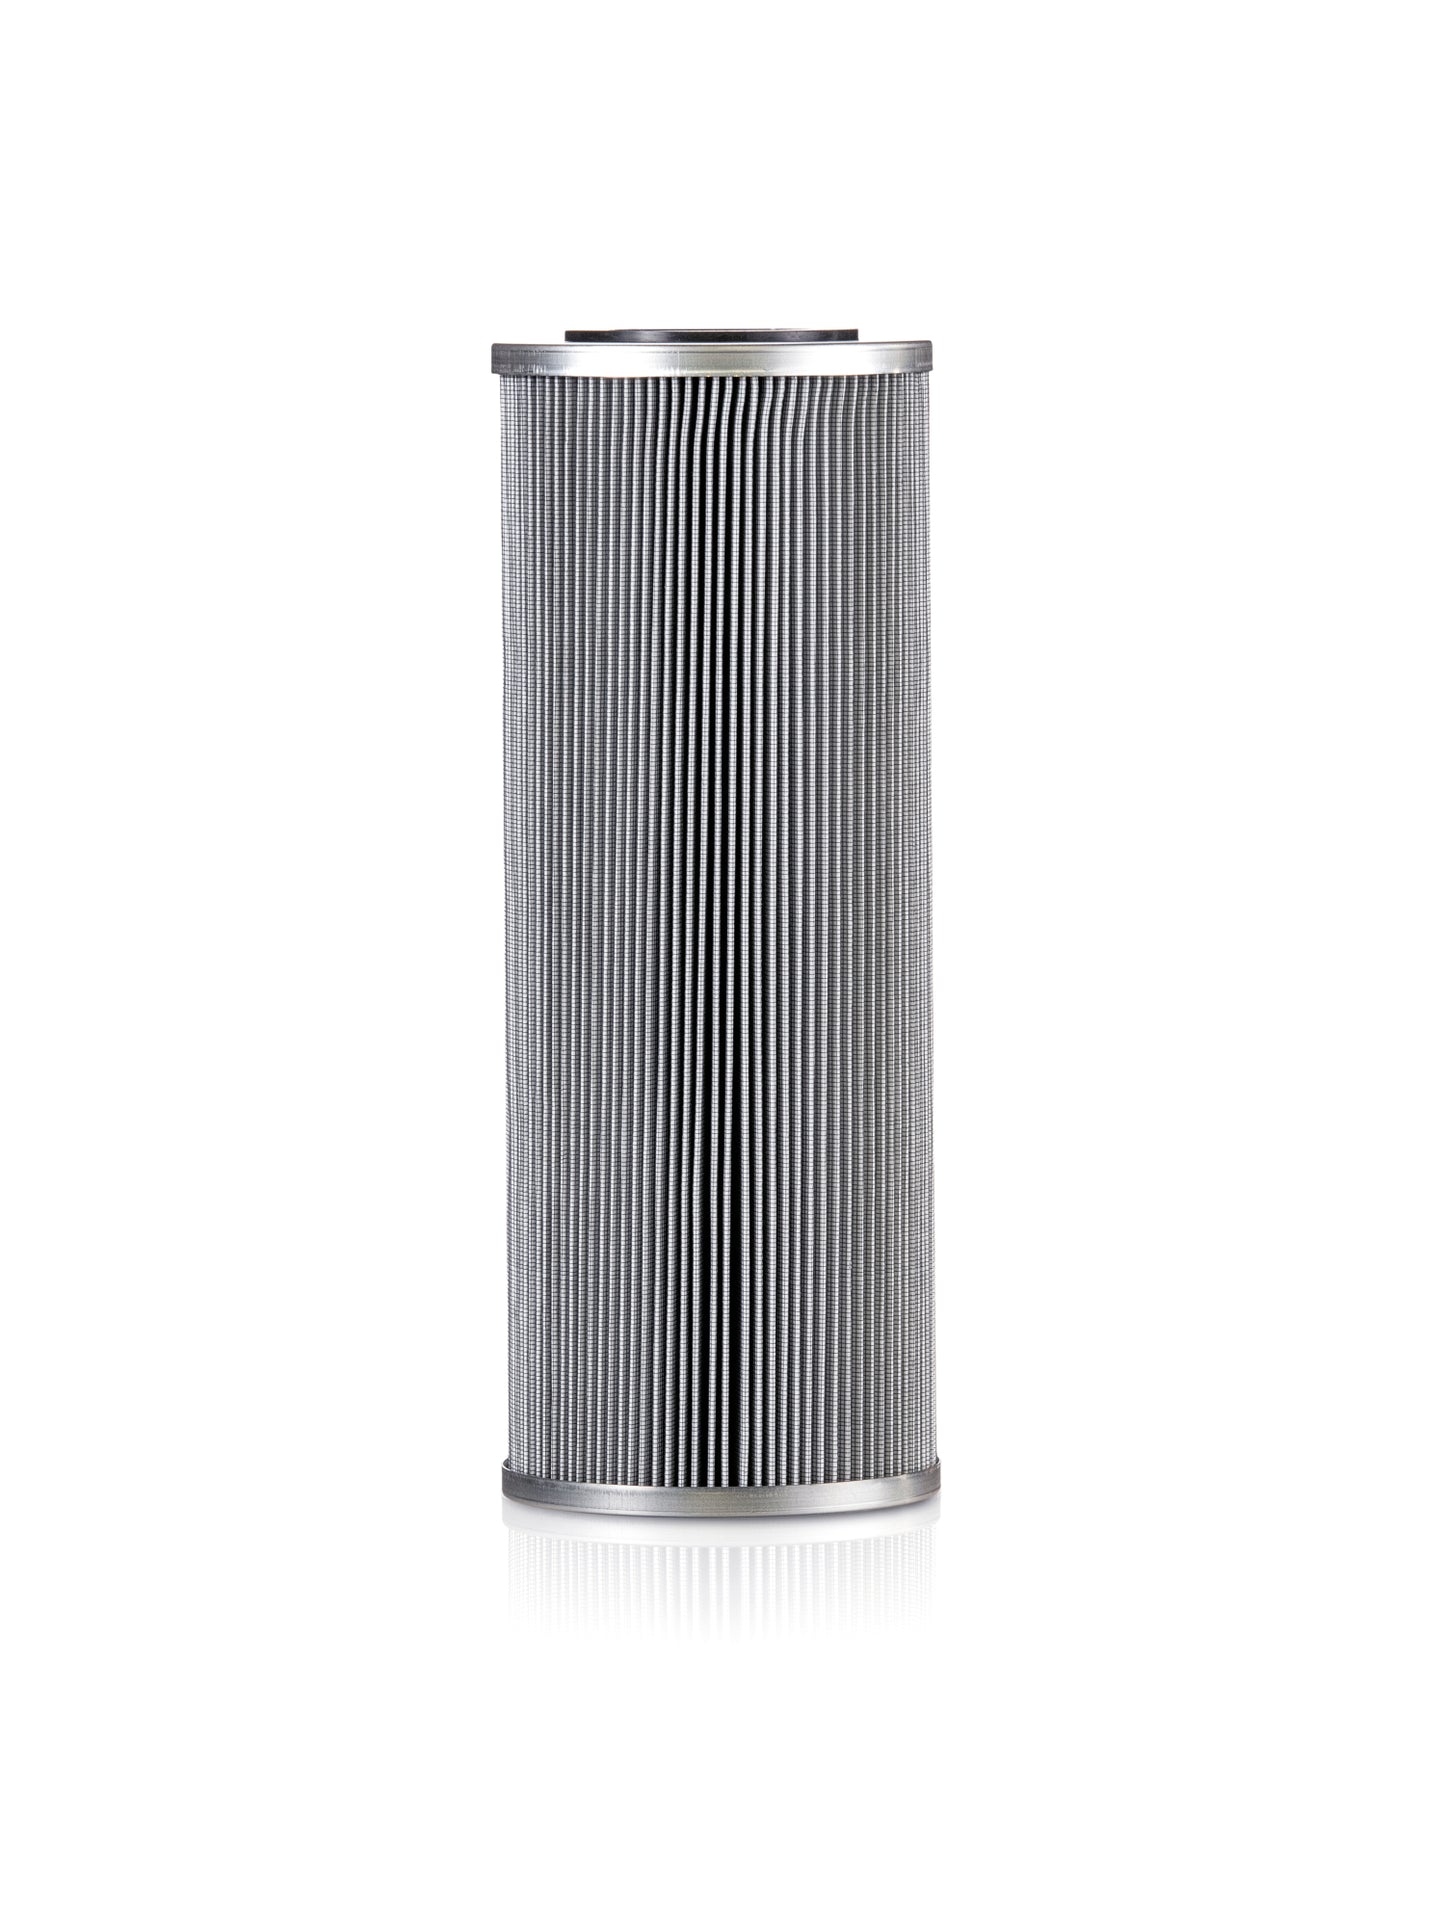 Cartridge Filter Element SWIFTSORB™ SF30316-8-25UME-WR 25 Micron Water Removal Media